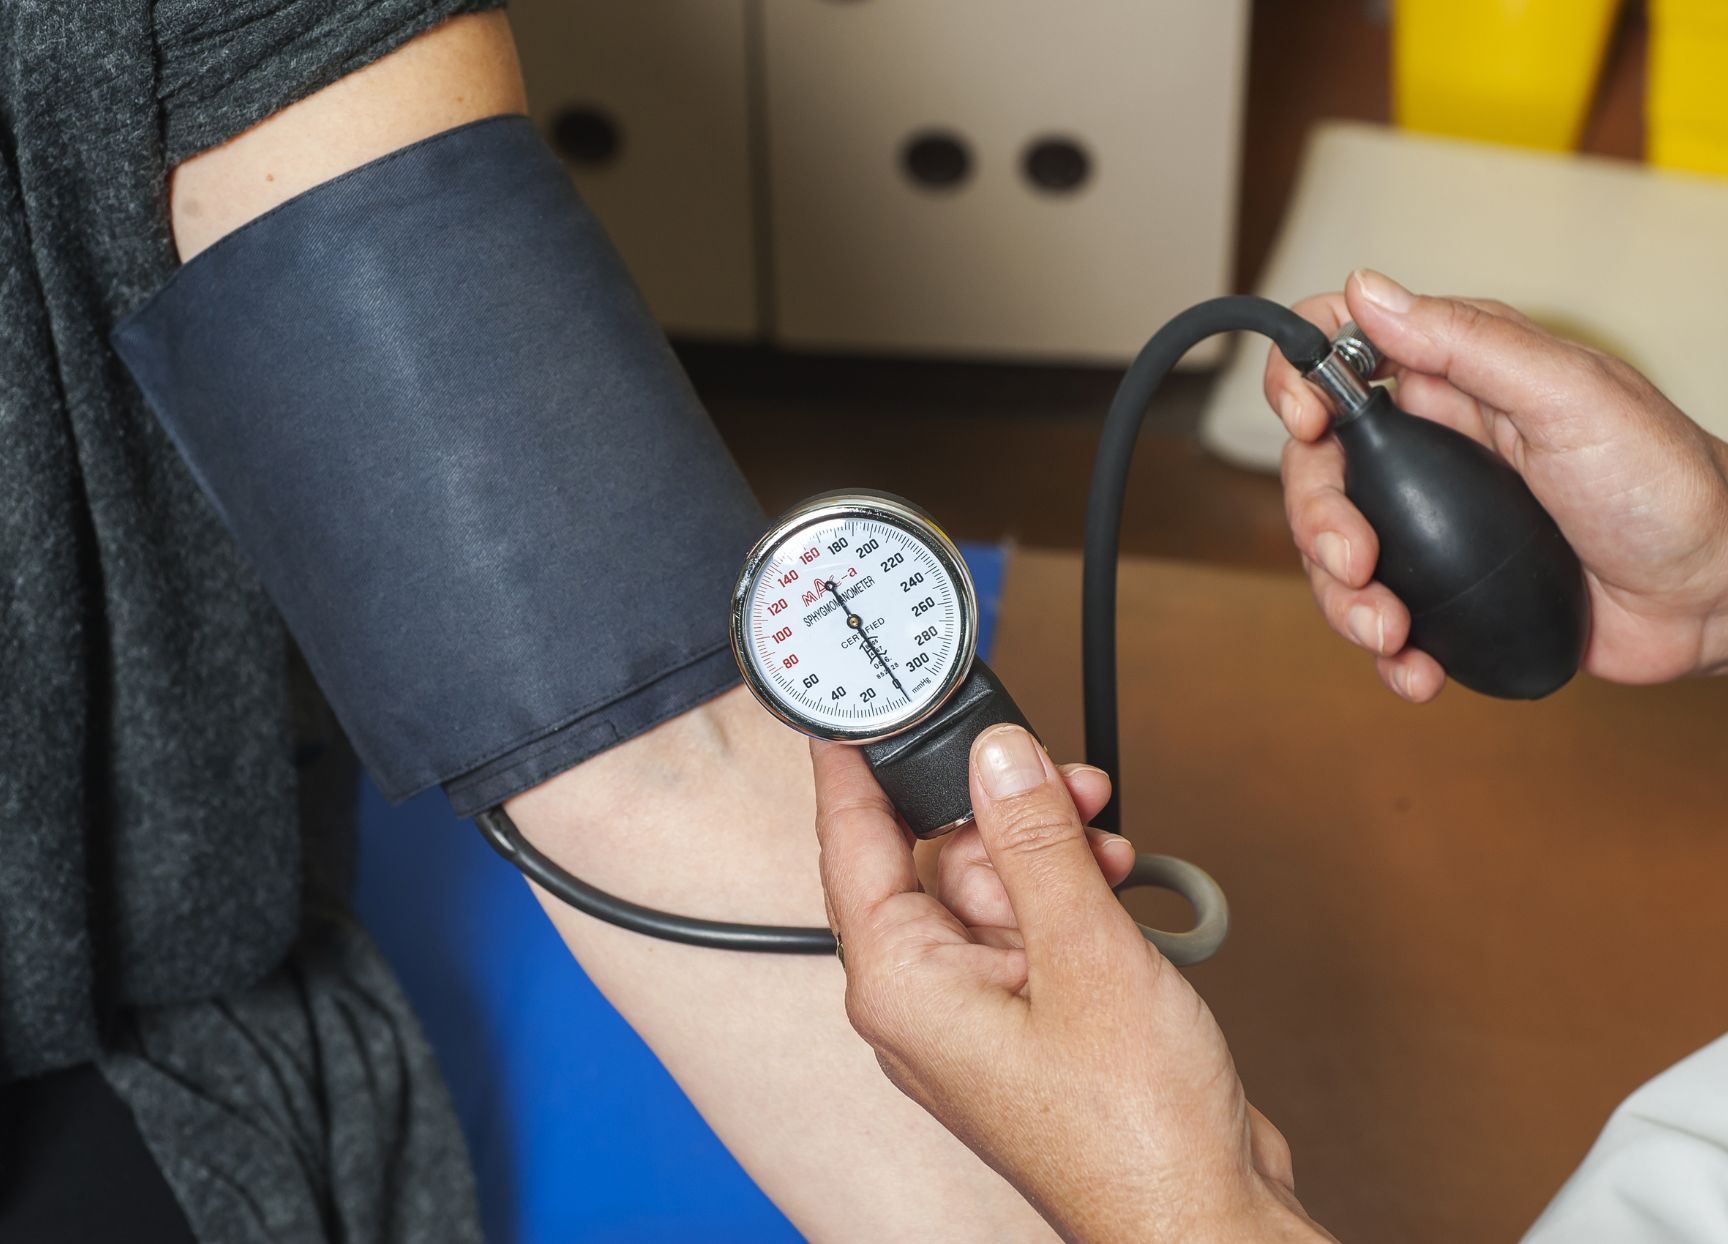 Can You Take Painkillers When You Have High Blood Pressure?